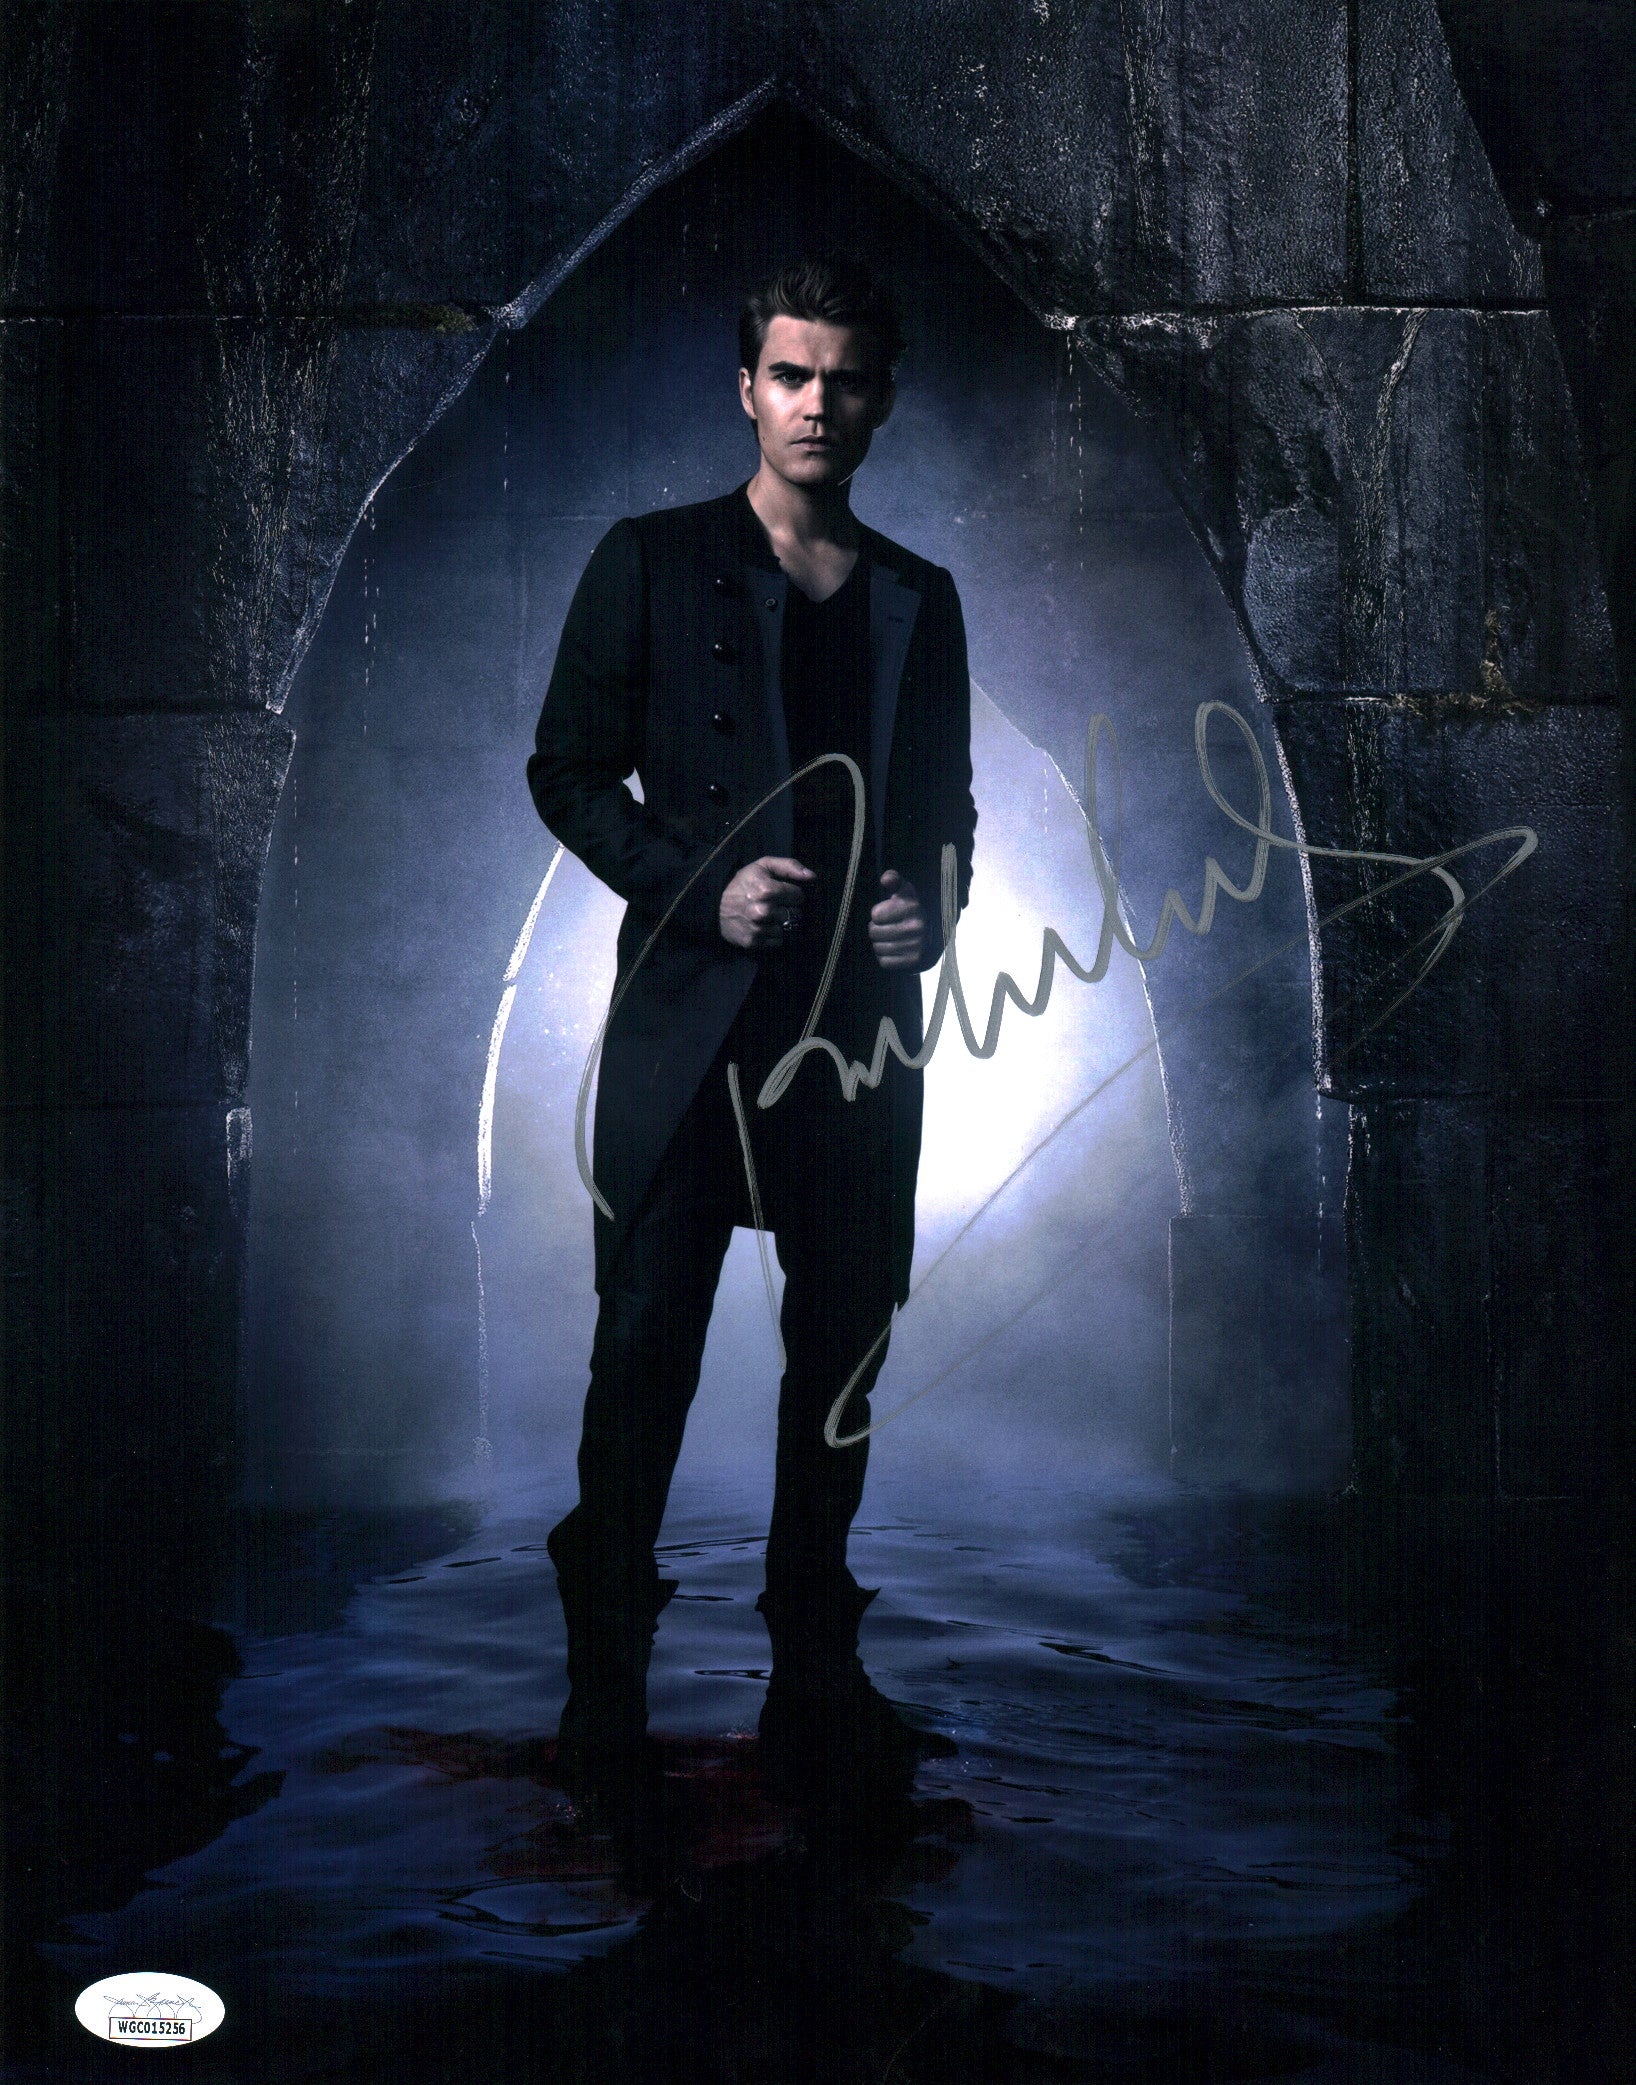 Paul Wesley Vampire Diaries 11x14 Signed Mini Poster JSA Certified Autograph